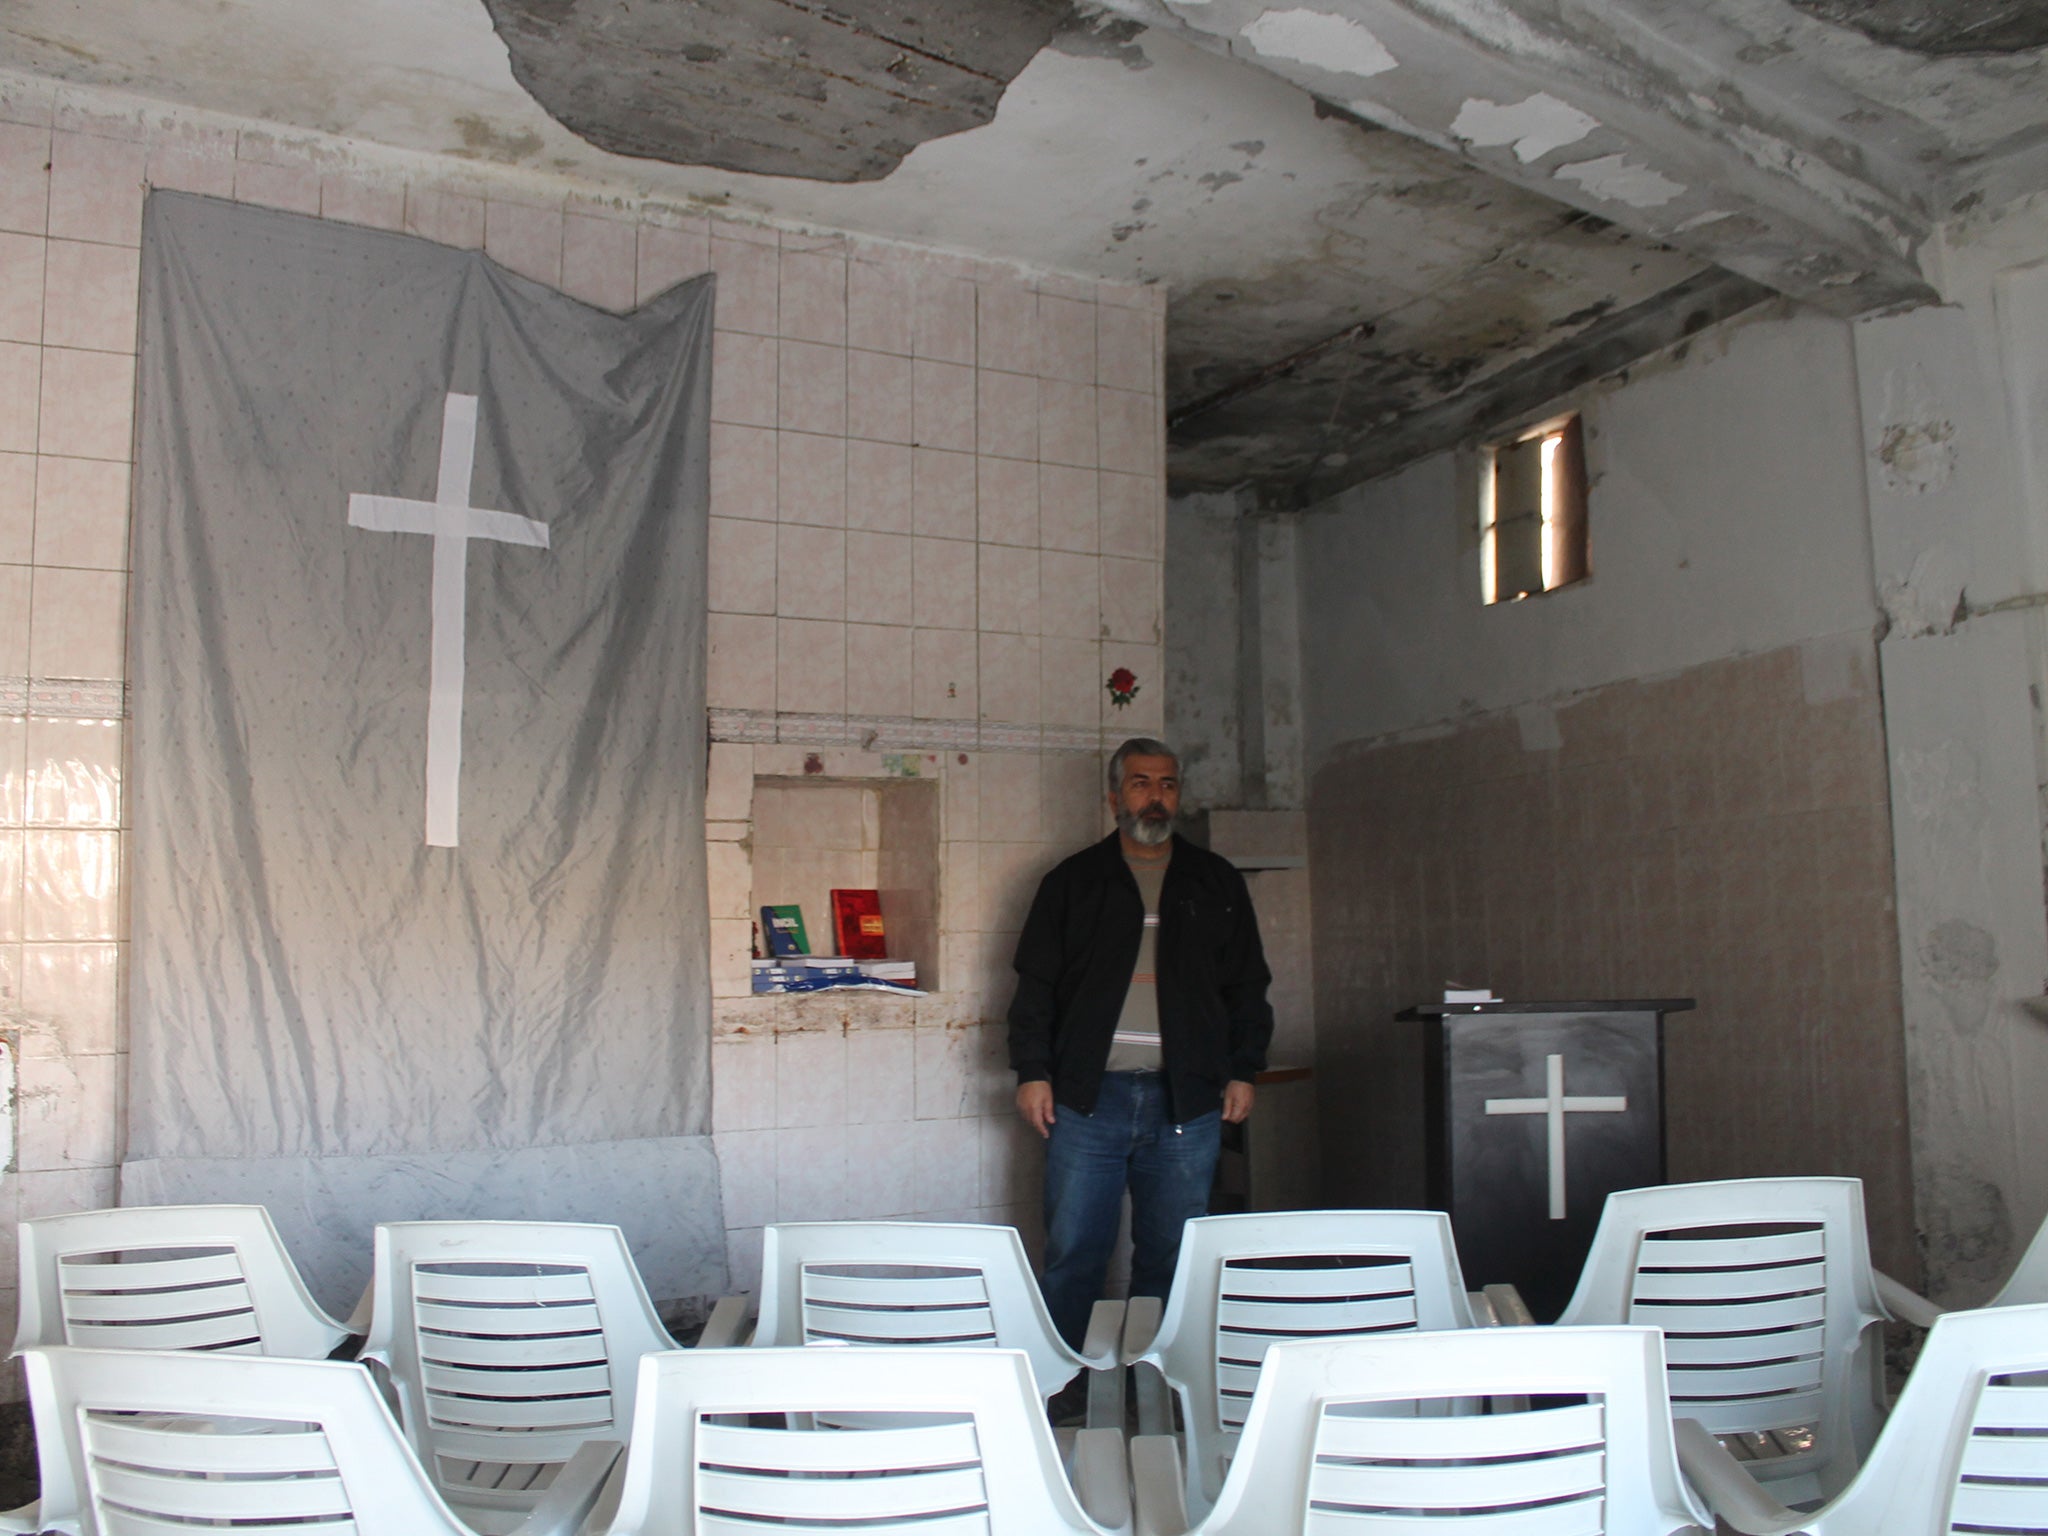 Pastor Eyup Badem of the Holy Light Church in Sanliurfa has been beaten repeatedly